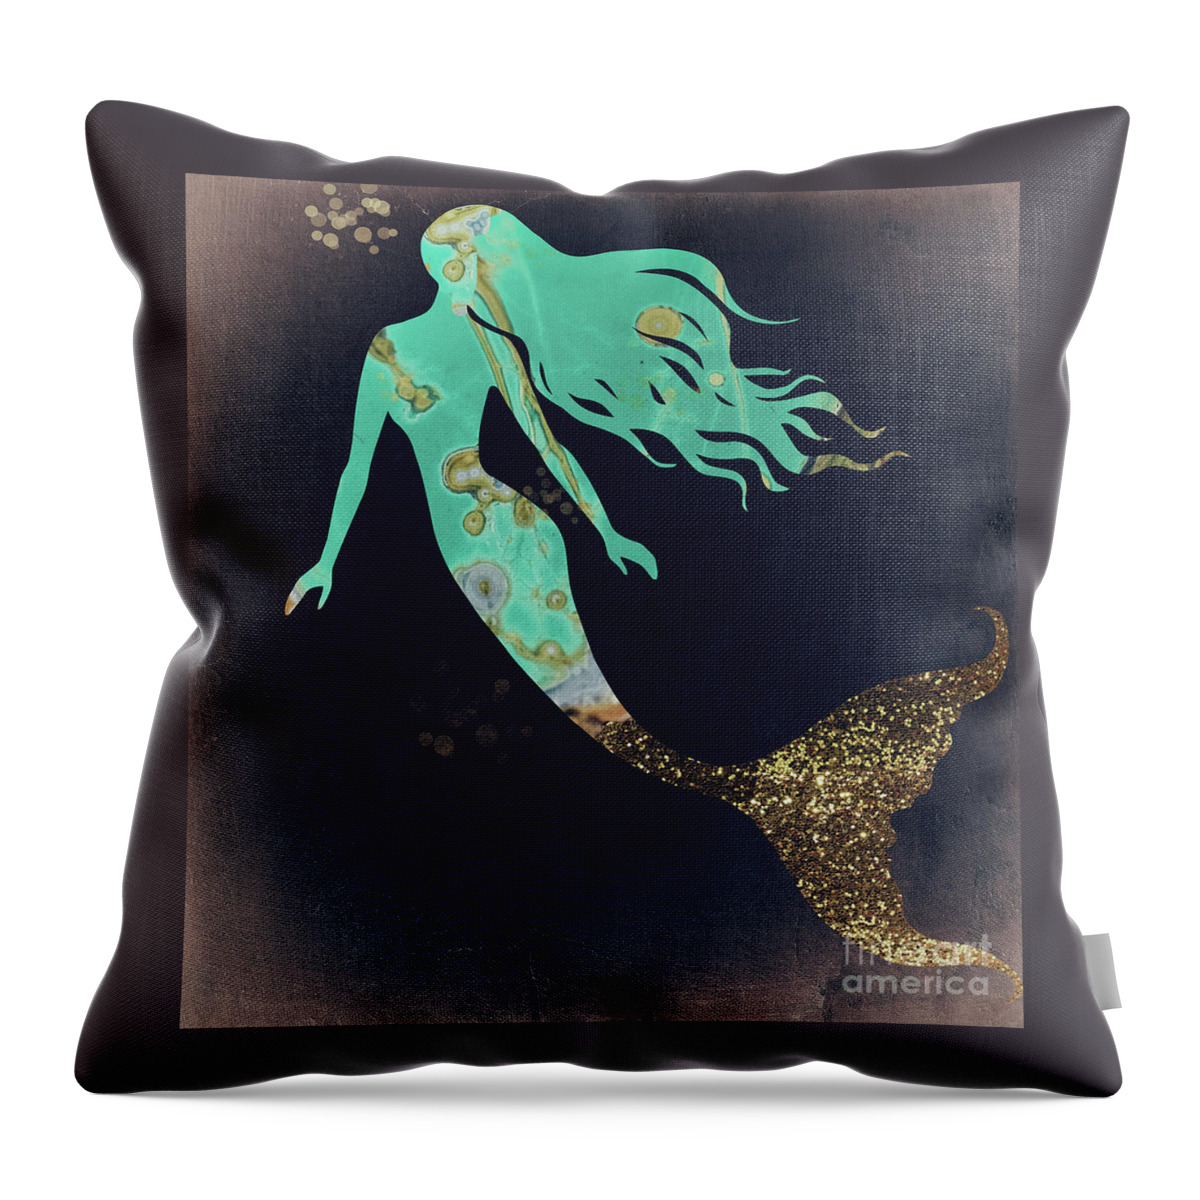 Mermaid Throw Pillow featuring the painting Turquoise Mermaid by Mindy Sommers